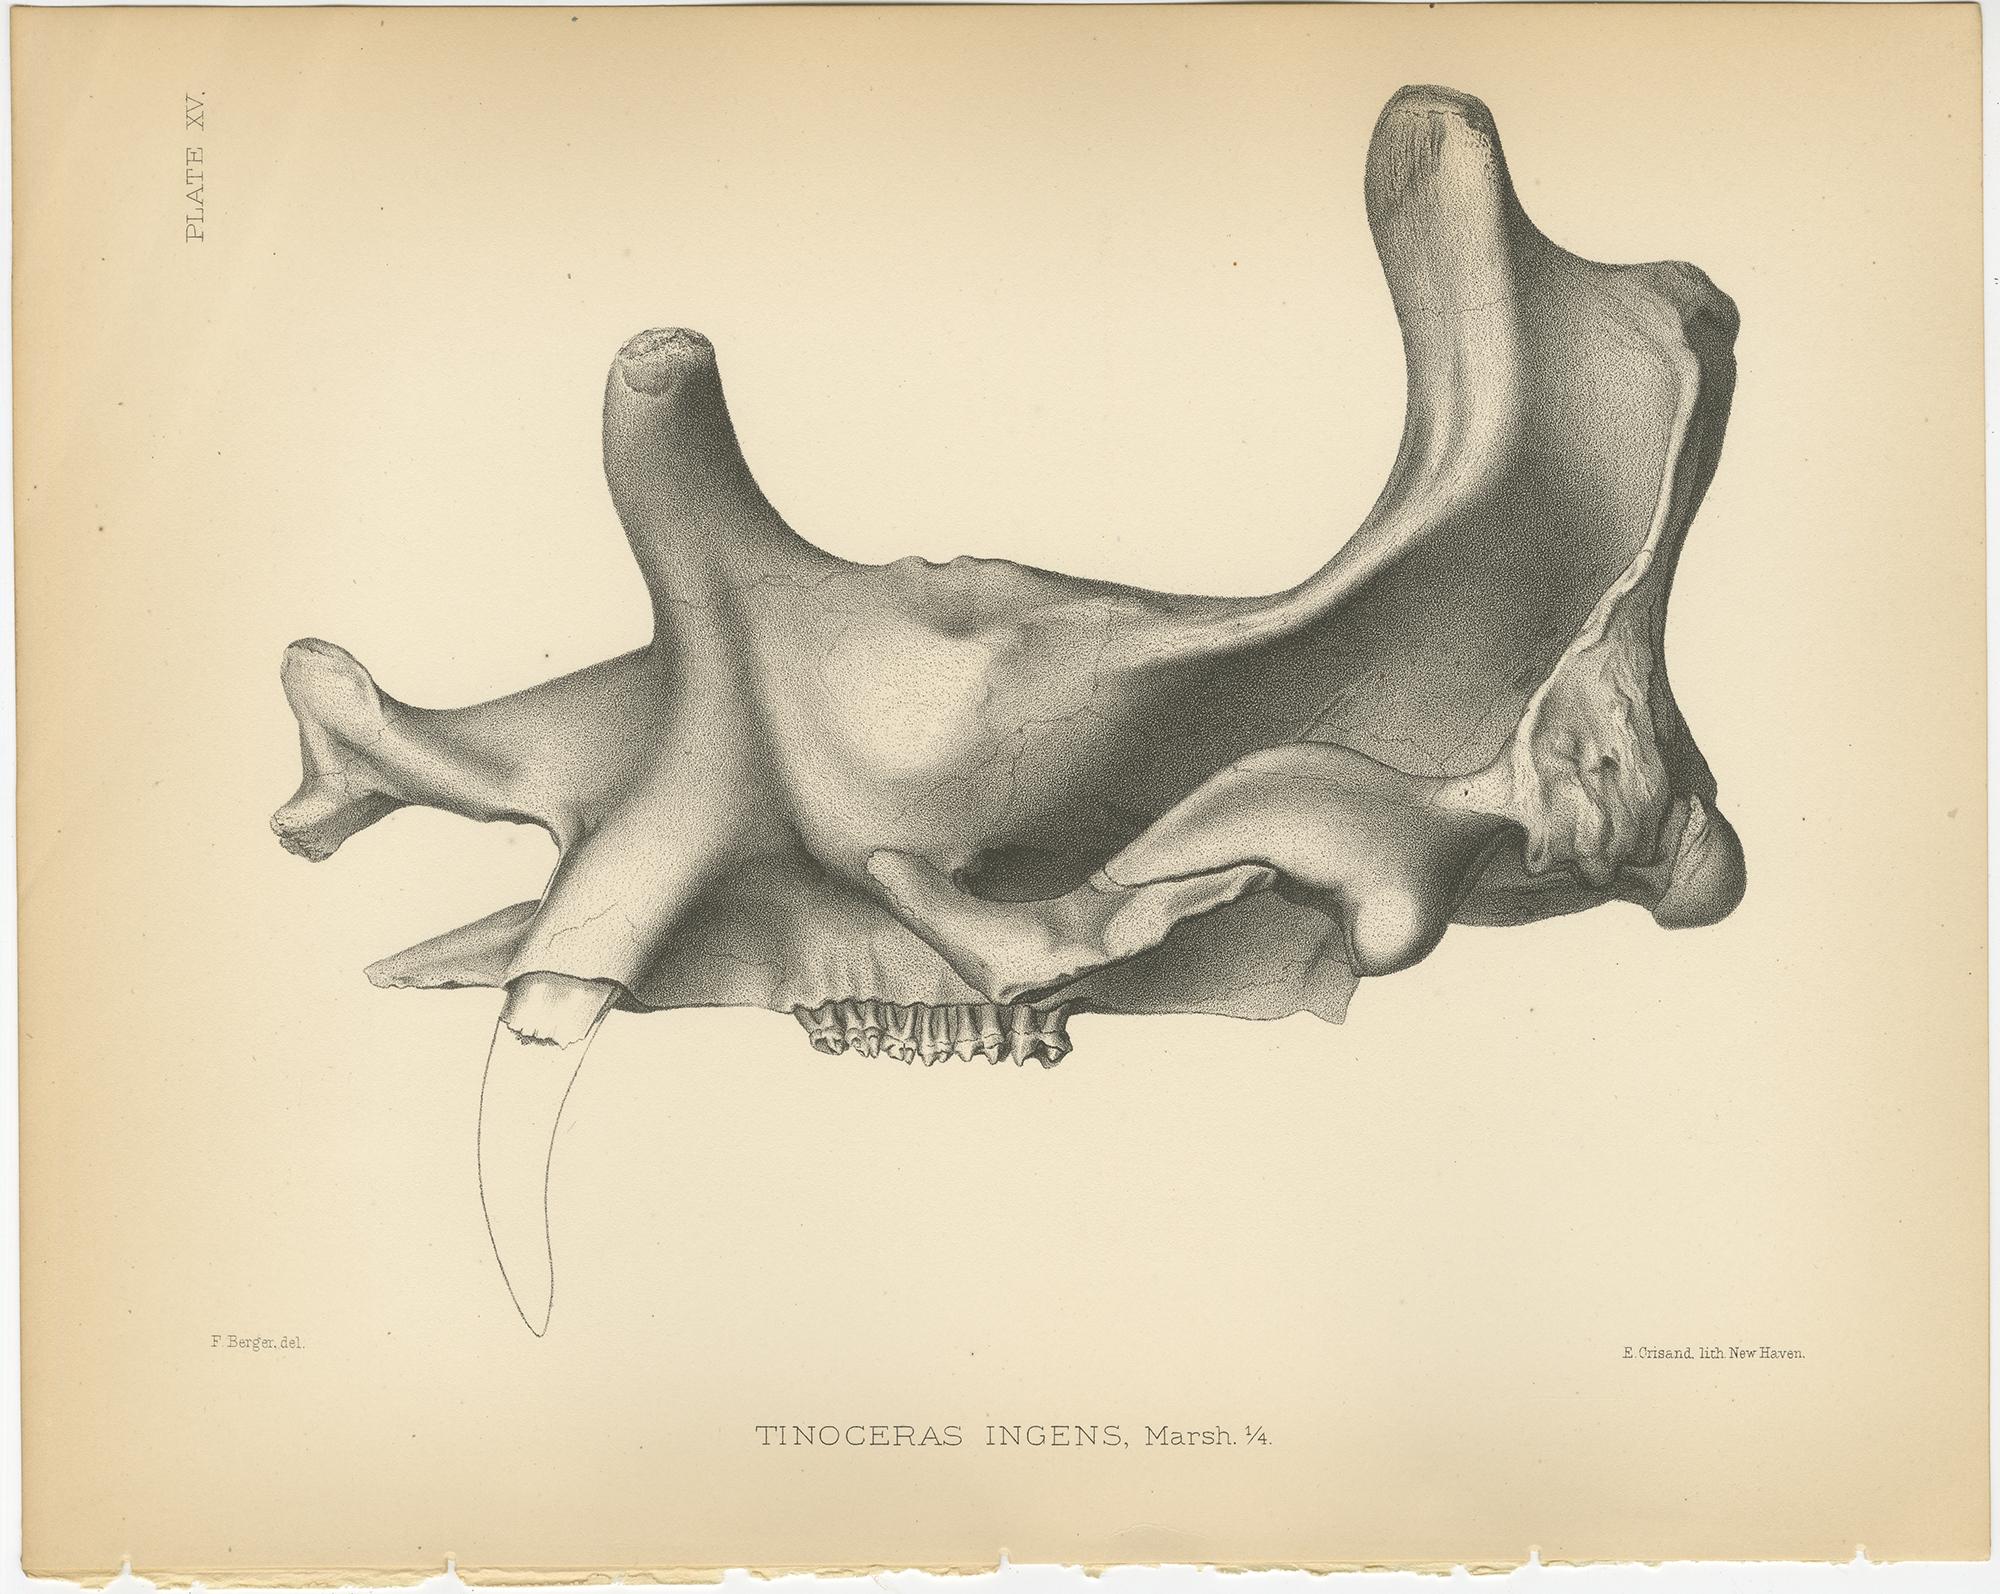 Antique print titled 'Tinoceras Ingens'. Original lithograph of the skull and teeth of a Tinoceras Pugnax, a large extinct mammal. This print originates from volume 10 of 'Monographs of the United States Geological Survey' by Othniel Charles Marsh.